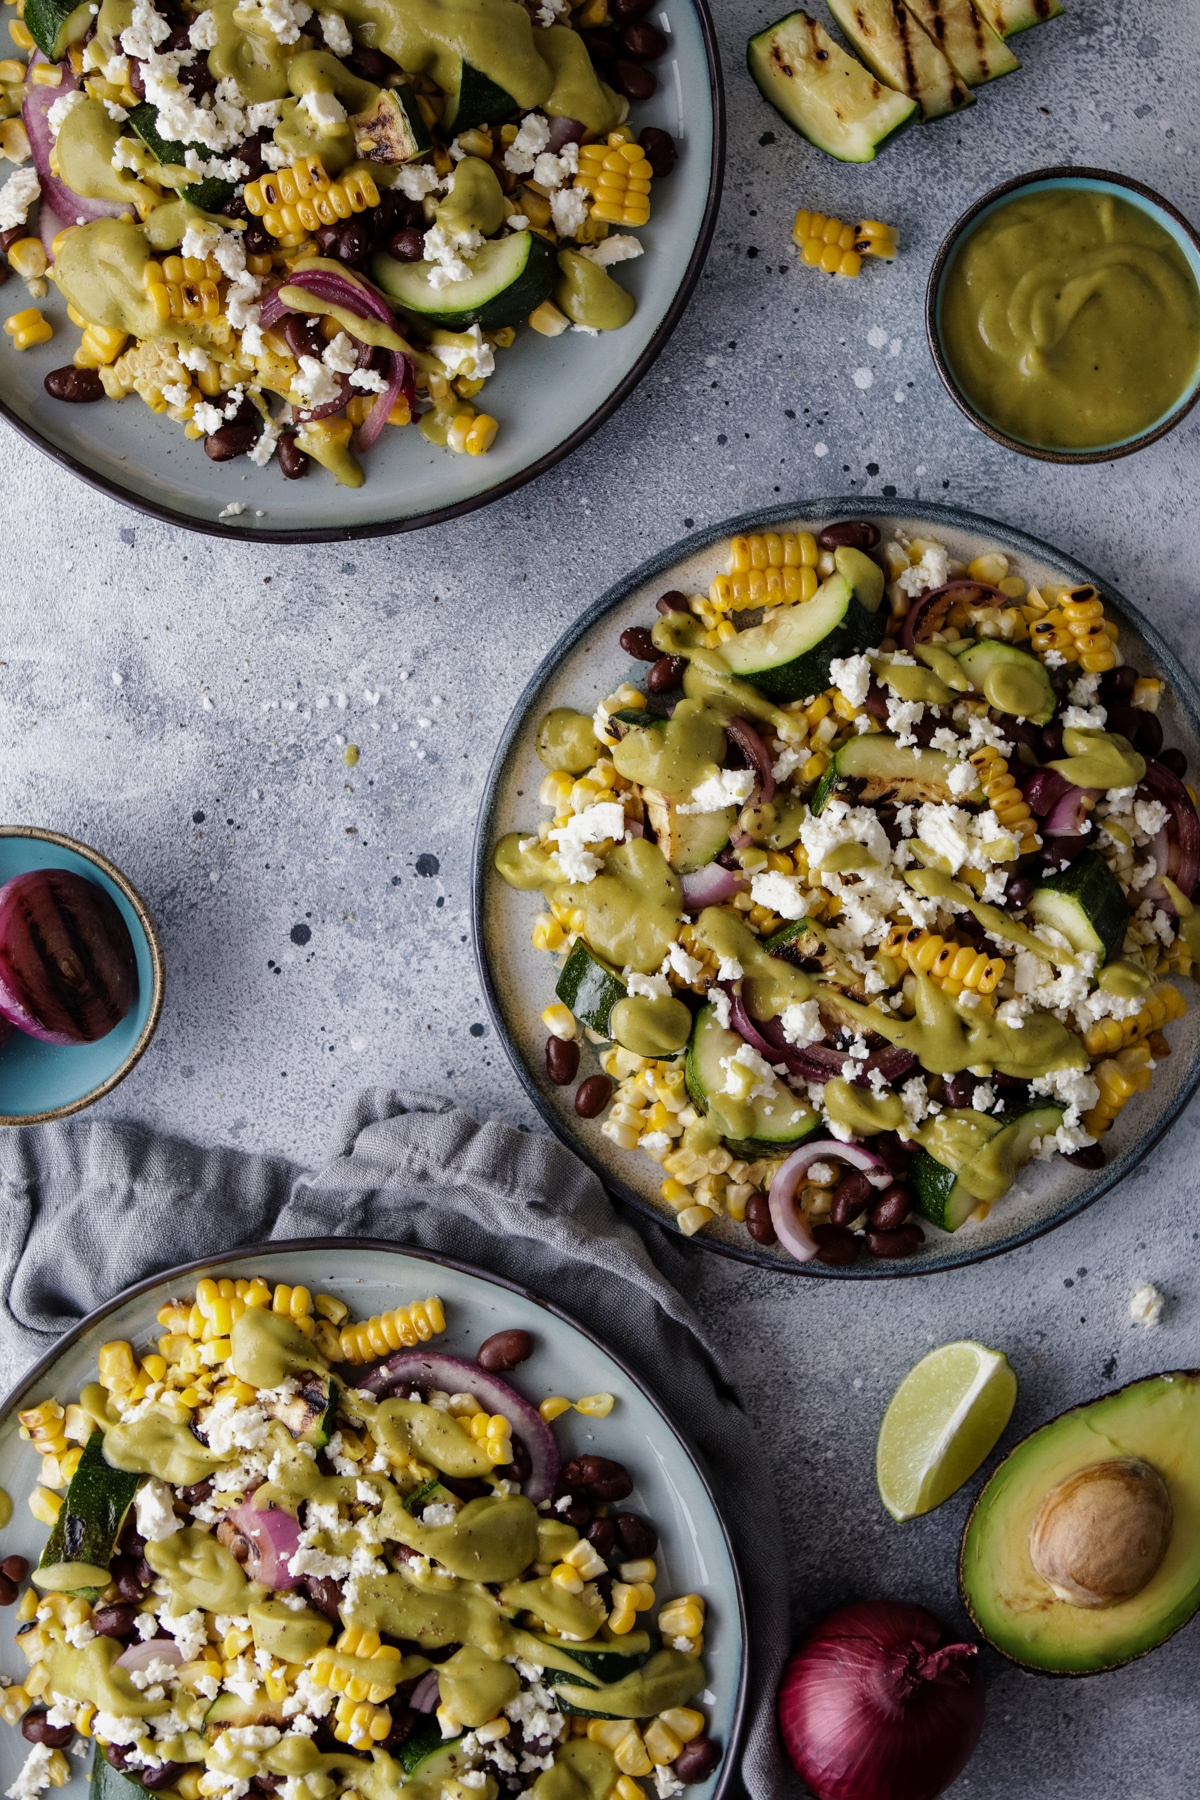 Three Plates with Corn Zucchini Salad Surrounded by Ingredients